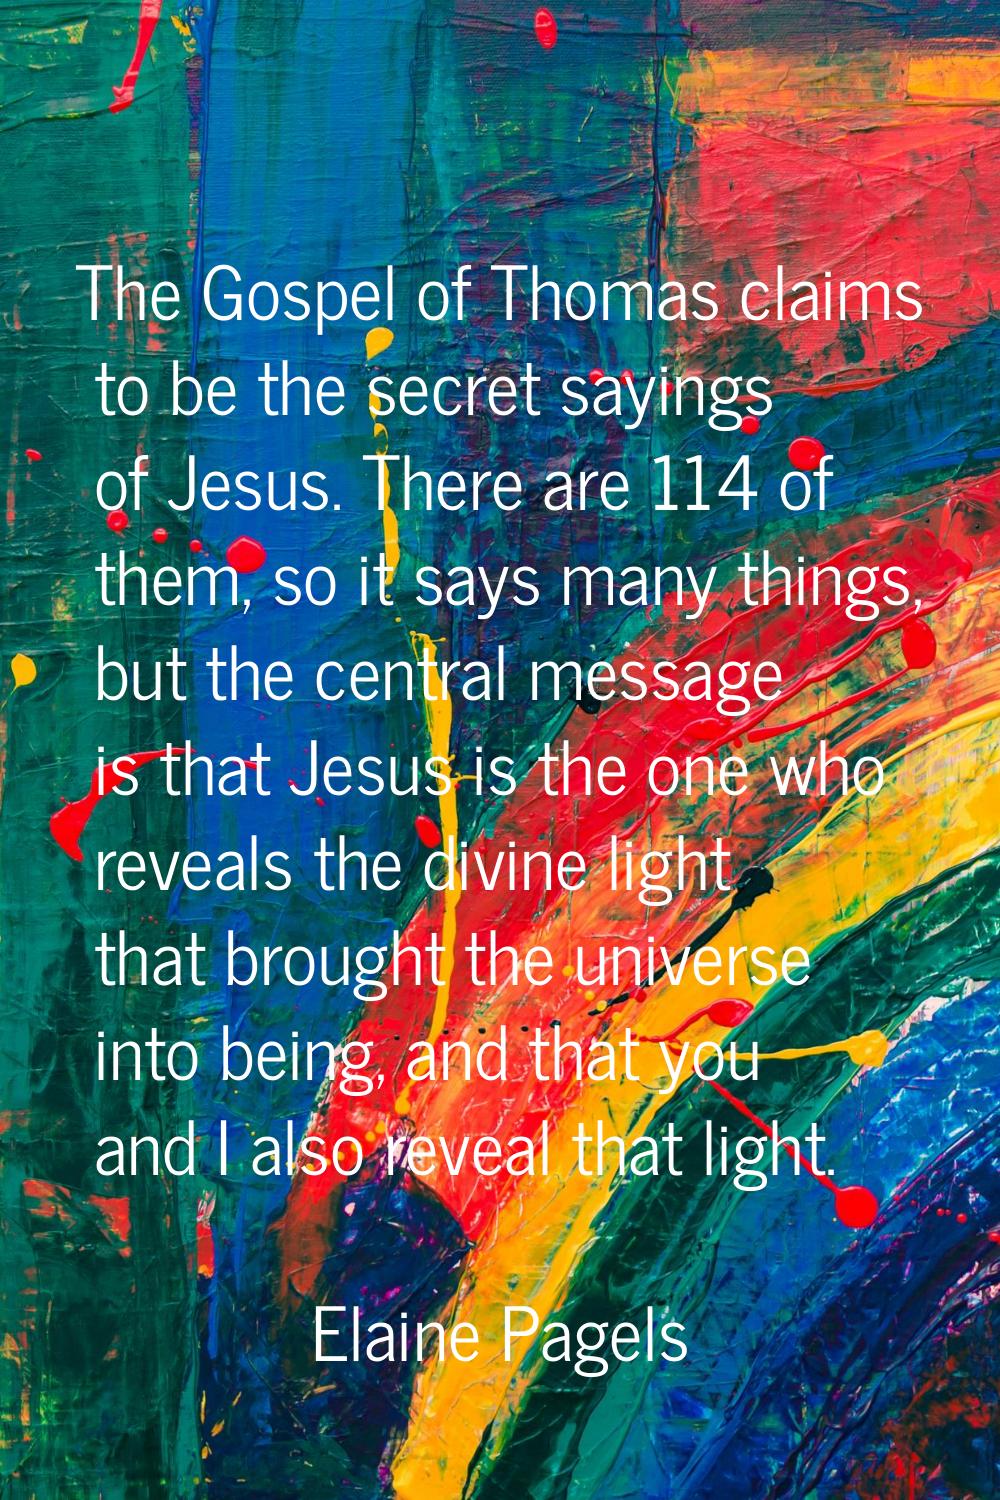 The Gospel of Thomas claims to be the secret sayings of Jesus. There are 114 of them, so it says ma